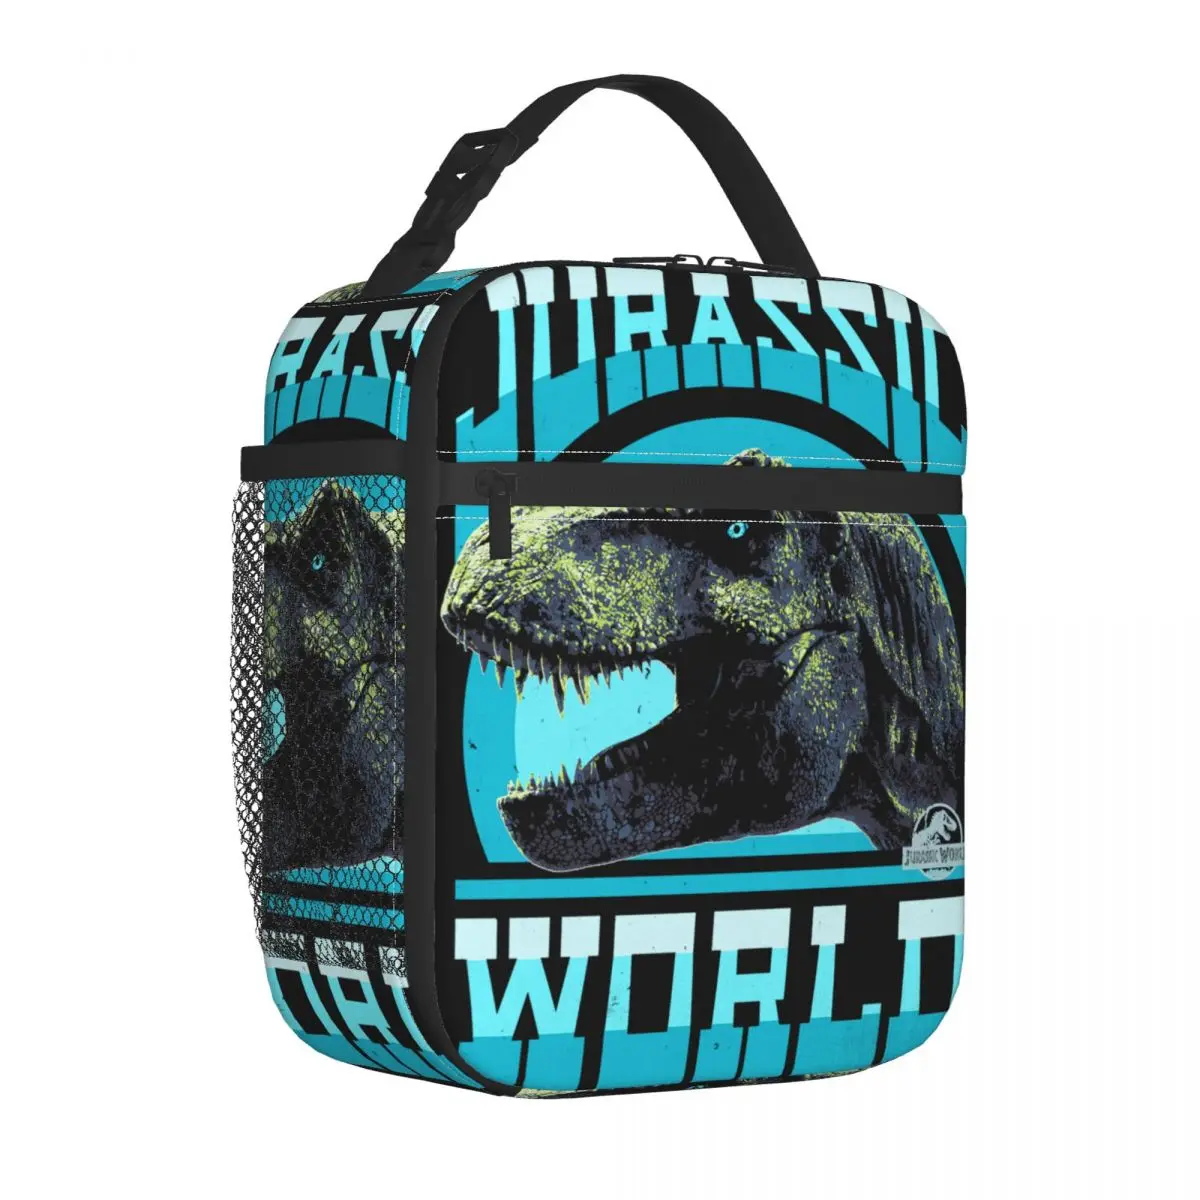 

Jurassic Park Old World Insulated Lunch Bag Cooler Bag Meal Container Thermal High Capacity Lunch Box Tote Men Beach Travel